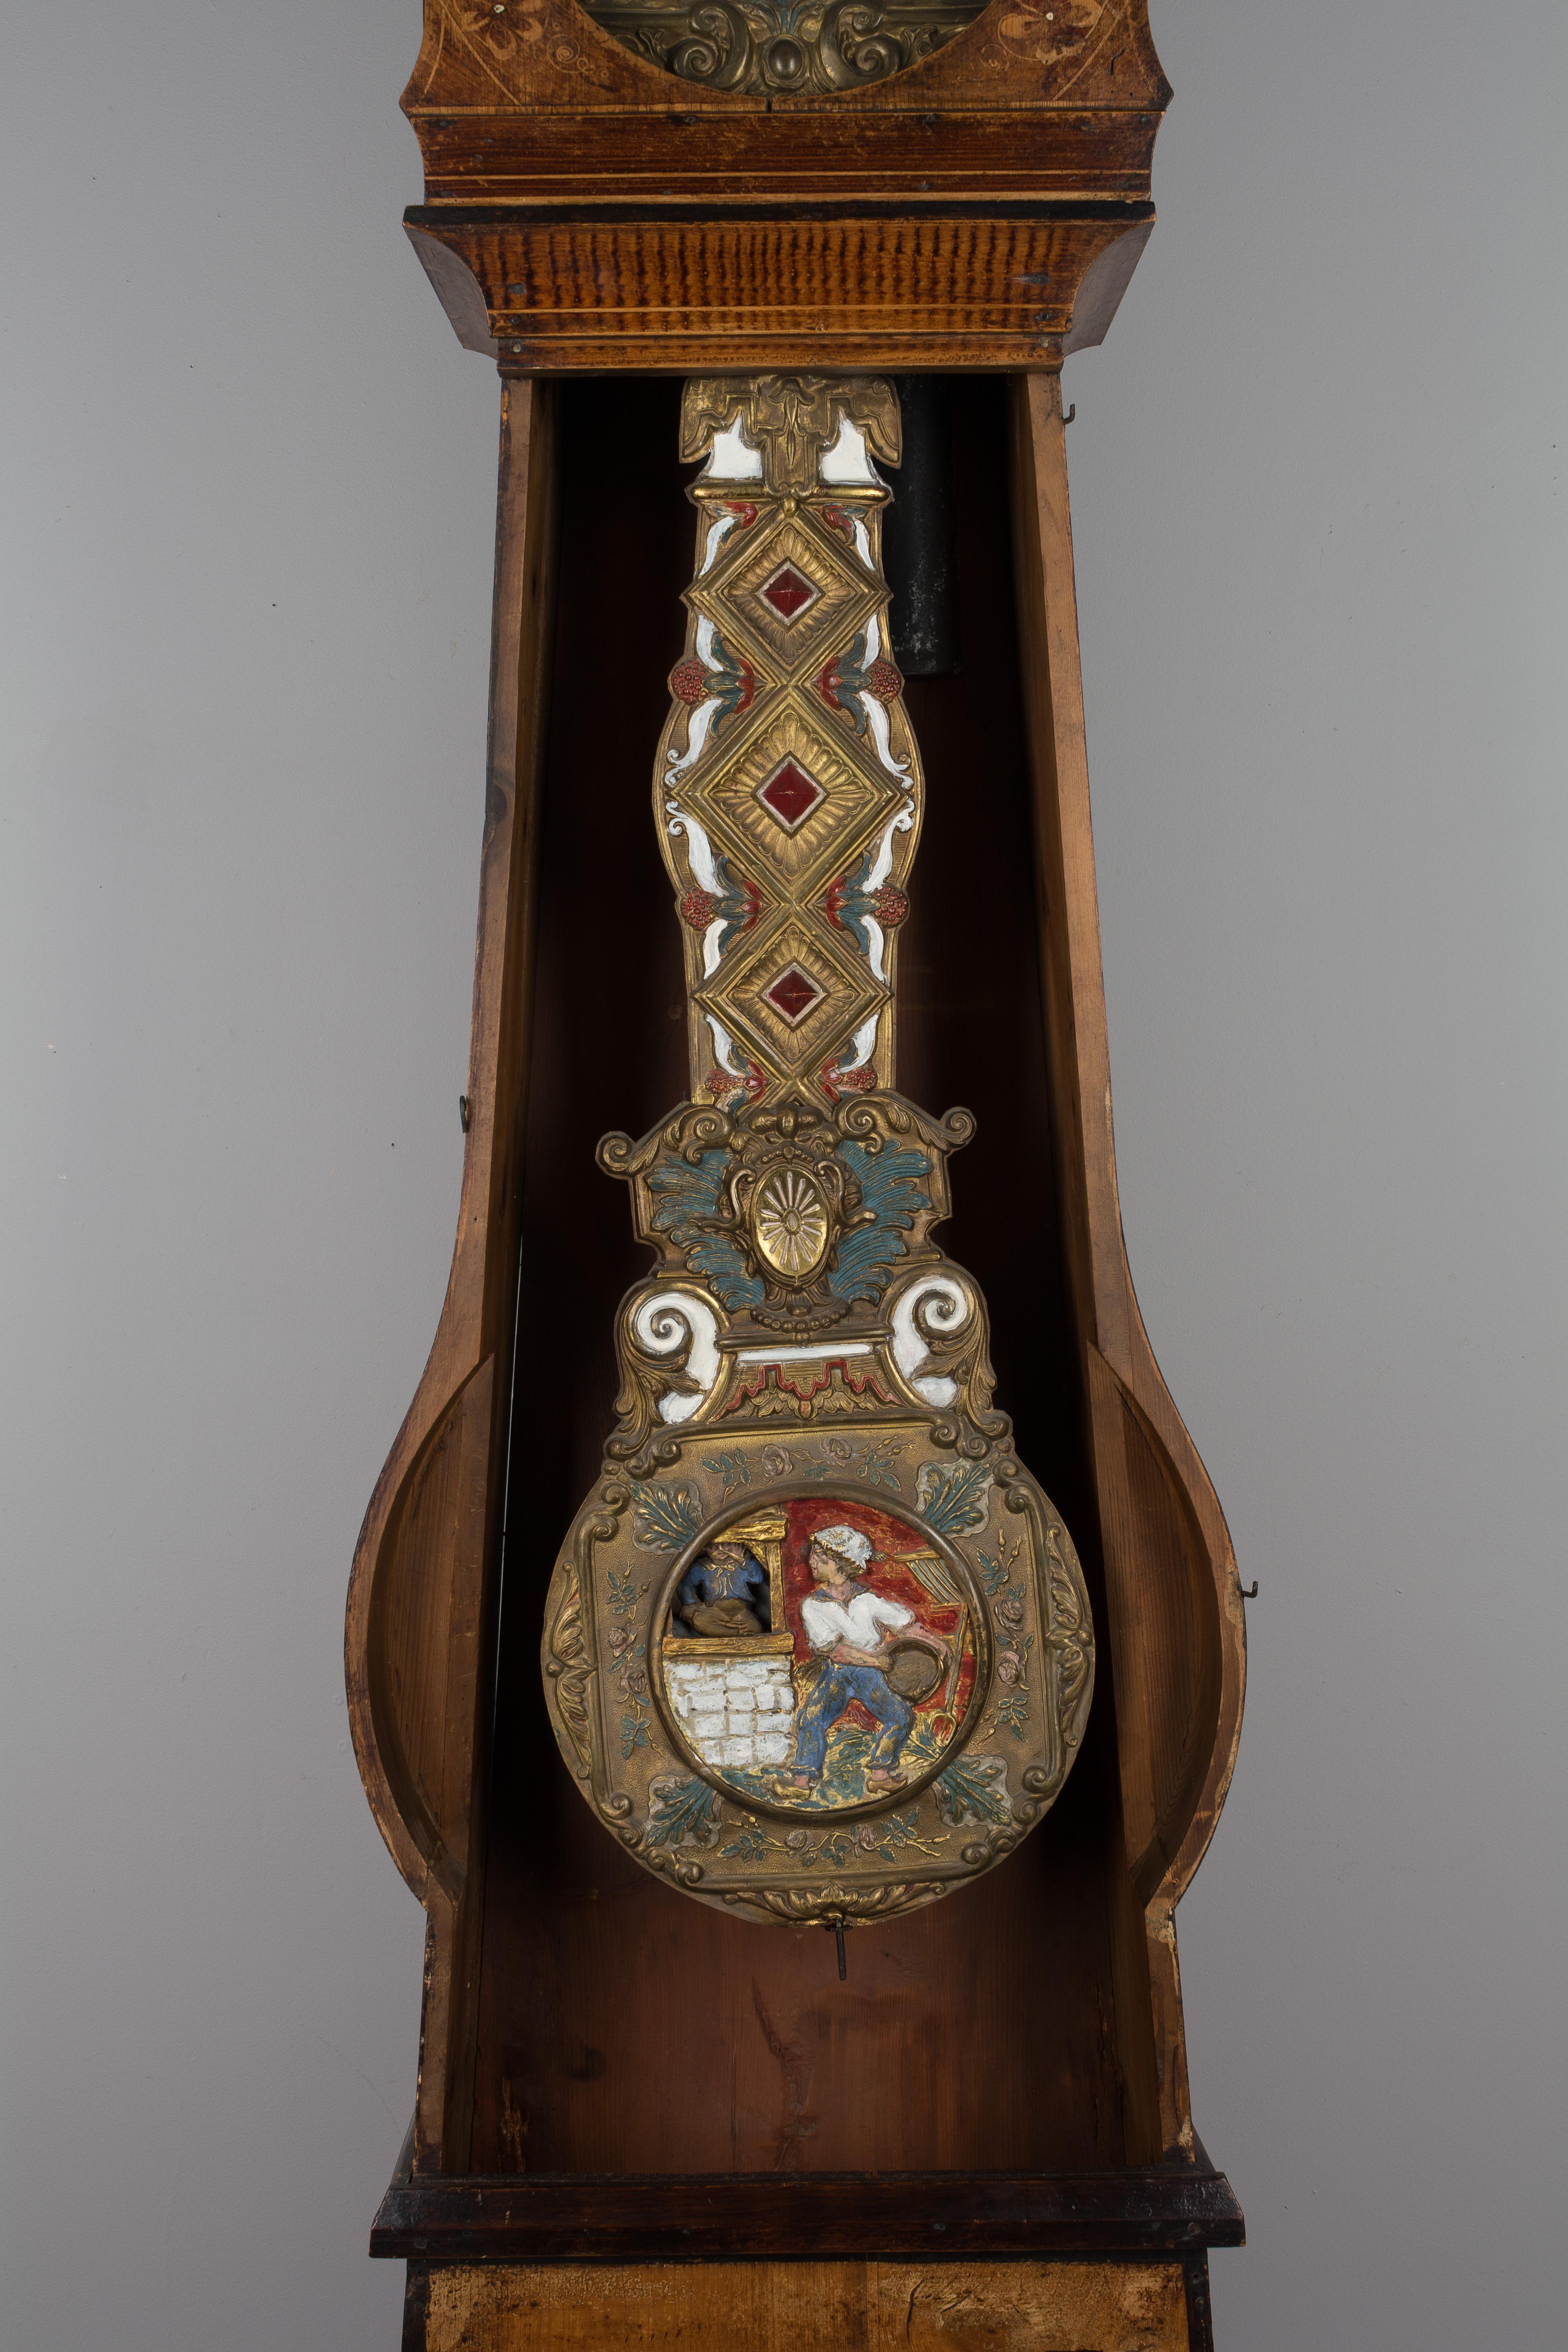 French Provincial 19th Century French Comtoise Grandfather Clock with Automate Pendulum